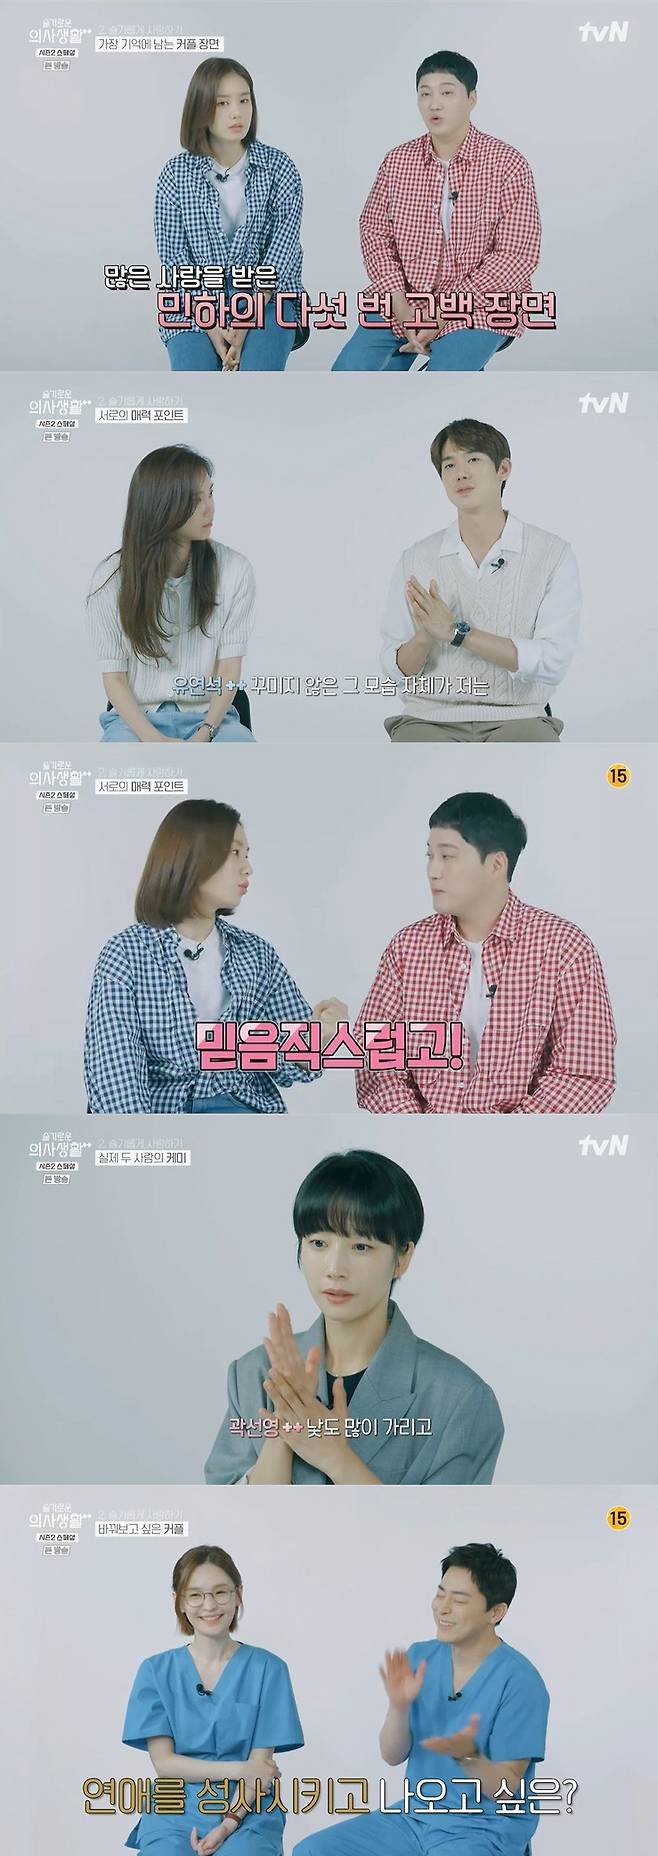 Sui-in 2 99s, Yul-Jez has revealed the behind-the-scenes hidden in the birth of the couple, Mido and Woman with a Parasol, facing left future plans.TVN Mokyo Drama Spicy Doctor Season 2 Special broadcast on the 23rd, 99z, Yuljez prepared the last behind-the-scenes images.99z and Yuljez gathered by major and told the behind-the-scenes story.There are so many gods shooting with children that the atmosphere of the filming scene has changed a lot according to the condition of the children, and there were many days when I filmed pleasantly all day, said Yoo Yeon-seok.Joe Hyun of Yoonbok, who both experienced NS and GS, conveyed the atmosphere of the filming scene, which was different from NS was calmly fun and GS was not calmly fun.I tried a lot to put the afterimages of the teacher I felt when I went to the hospital in the ambassador, said Jeun Mi-do, who prepared for the role.On the other hand, Ha Yun-kyung said, I thought that other characters were strong, so I should get rid of the characters. I wanted to be seen as a person who approached everyone comfortably.Kim Dae-myung said he looks for a lot of basic speech for detailed acting.He also had time to answer the questions of viewers as a character. The obstetrics and gynecology team opened their mouths to Myeongwon fox talk.Obstetrics and gynecology members wrapped Actor Kim Hye-in as absolutely not a fox, but a good angel in the world. Asked if Lee Ik-juns MBTI is EEE, Jo Jung-suk said, I do not know.I didnt test it, Joe Hyun said, adding, I think its unexpectedly I.Asked how many times have you been in and out of Chae Song-hwas room, he said, I have been back and forth without a lot.Four couples from Sul-ui gathered separately to conduct an interview.Kwak Sun-young and Jung Kyung-ho said, I was excited to see it.Yoo Yeon-Seok recalled, It seems that the first kissing god was beautiful in many ways in season 2.Shin Hyun-bin said, It was small but good to have a daily conversation and familiarity with each other while eating together at the kimchi stew house.They also cited each others attractive points.Yoo Yeon-seok said, I watched the season 2 once and I was pretty in the position of the gardener who was not decorating the winter that seemed so beautiful.Shin Hyun-bin, meanwhile, mentioned the bean pods in the winter, saying, Would not existence itself be good?Jo Jung-suk said, Ik Jun seems to be cute with Songhwa.It looks perfect, but Ikjun has a gap in his eyes and has a charm to fill the gap. Jeun Mi-do said, Ikjun makes Songhwa laugh more than anyone else.It always feels good when and when I meet. Thats the biggest attraction. Actually KeMido was good: unlike the warm-hearted excursion couple, Ahn Eun-jin said, (with Kim Dae-myung) thought the gag code didnt fit well.It was a little far away, he said honestly and laughed.Jung Kyung-ho and Kwak Sun-young became close friends with the same age chemistry. In particular, Kwak Sun-young said, It is a character that covers a lot of people and places a lot of streets.So I was so grateful, he said, expressing his gratitude for Jung Kyung-ho.Kim Dae-myung said, I can not hurt you if you meet with a favorable feeling.I waited for when I could do it for her, when I could risk my life. Asked if she could get in love with a friends brother/brother, Jung Kyung-ho and Kwak Sun-young each listened to X and O panels, Jung Kyung-ho said, I think its a bit embarrassing.It will be okay if the good results come out, but if you break up badly, it will be hard to meet your friend for a long time. How do you do when you break up?I think I can do it because I start dating if I do not think I can go too far. However, when asked, Will you reveal it to your brother Lee Jun-joon? Jung Kyung-ho said, Its a secret once. My brother is Lee Ik-jun.I have to keep it a secret from a person named Lee Ik-joon, and Kwak Sun-young also said, Do you have to reveal your love for your family? 99z, collected for the last ensemble. Jeun Mi-do said, The manager only needed to get his hands together at first, but after the first concert, (the manager) said, Its better than I thought.Lets play it ourselves, he recalled.Yoo Yeon-Seok spent more time practicing than shooting, Jo Jung-suk confessed the burden of having to sing while playing guitar.In particular, Jung Kyung-ho laughed, saying, I have never laughed and enjoyed while playing the band. It was not so fun.The question Do you intend to keep the band was all discussed positively.Jo Jung-suk said, I talked about gathering after the end. I can not get together because of my schedule, but I can not retire.